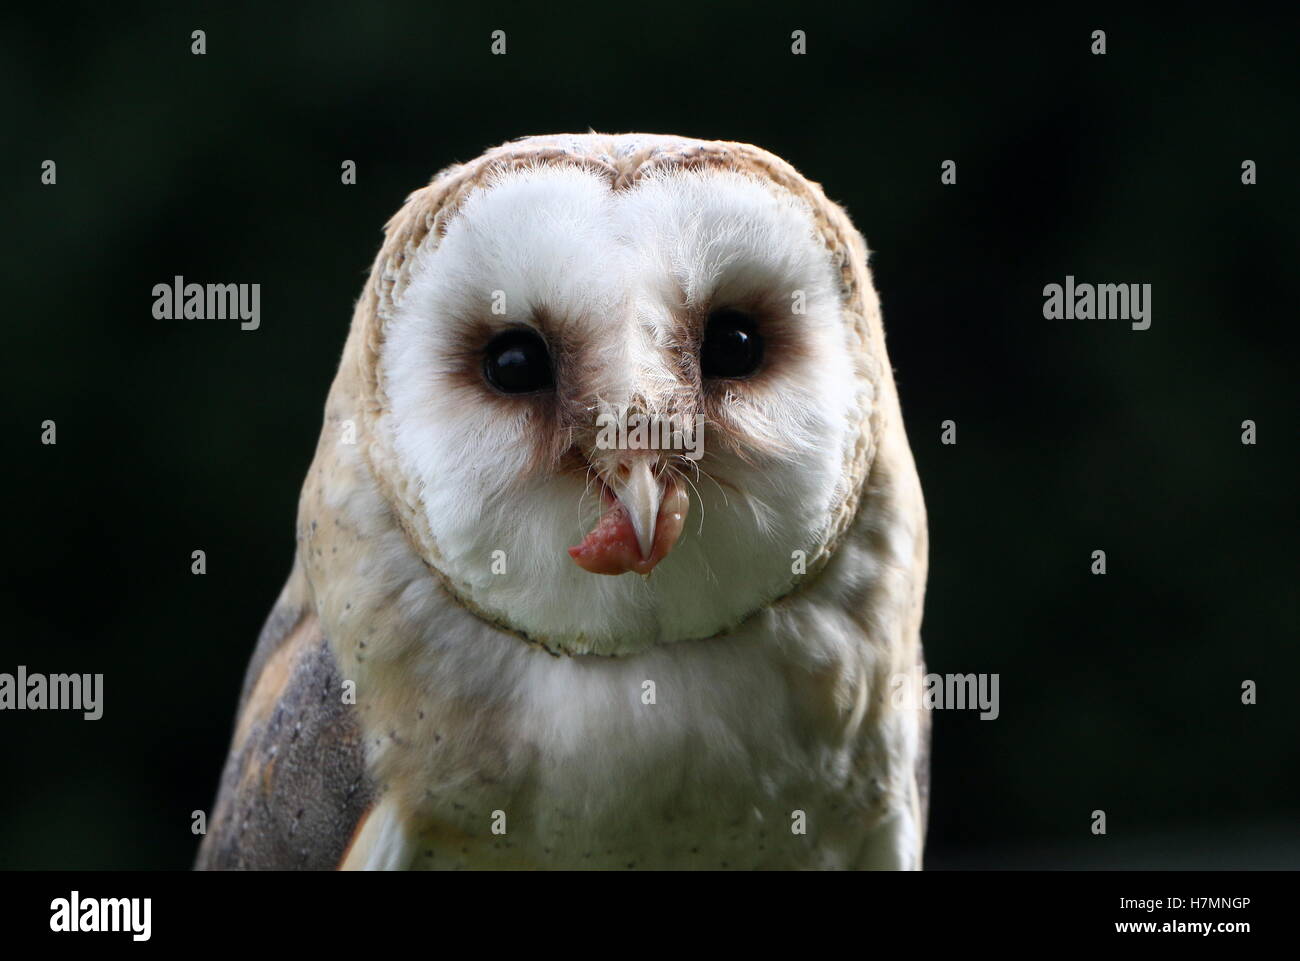 European Barn owl (Tyto alba) in close-up while swallowing a piece of meat Stock Photo